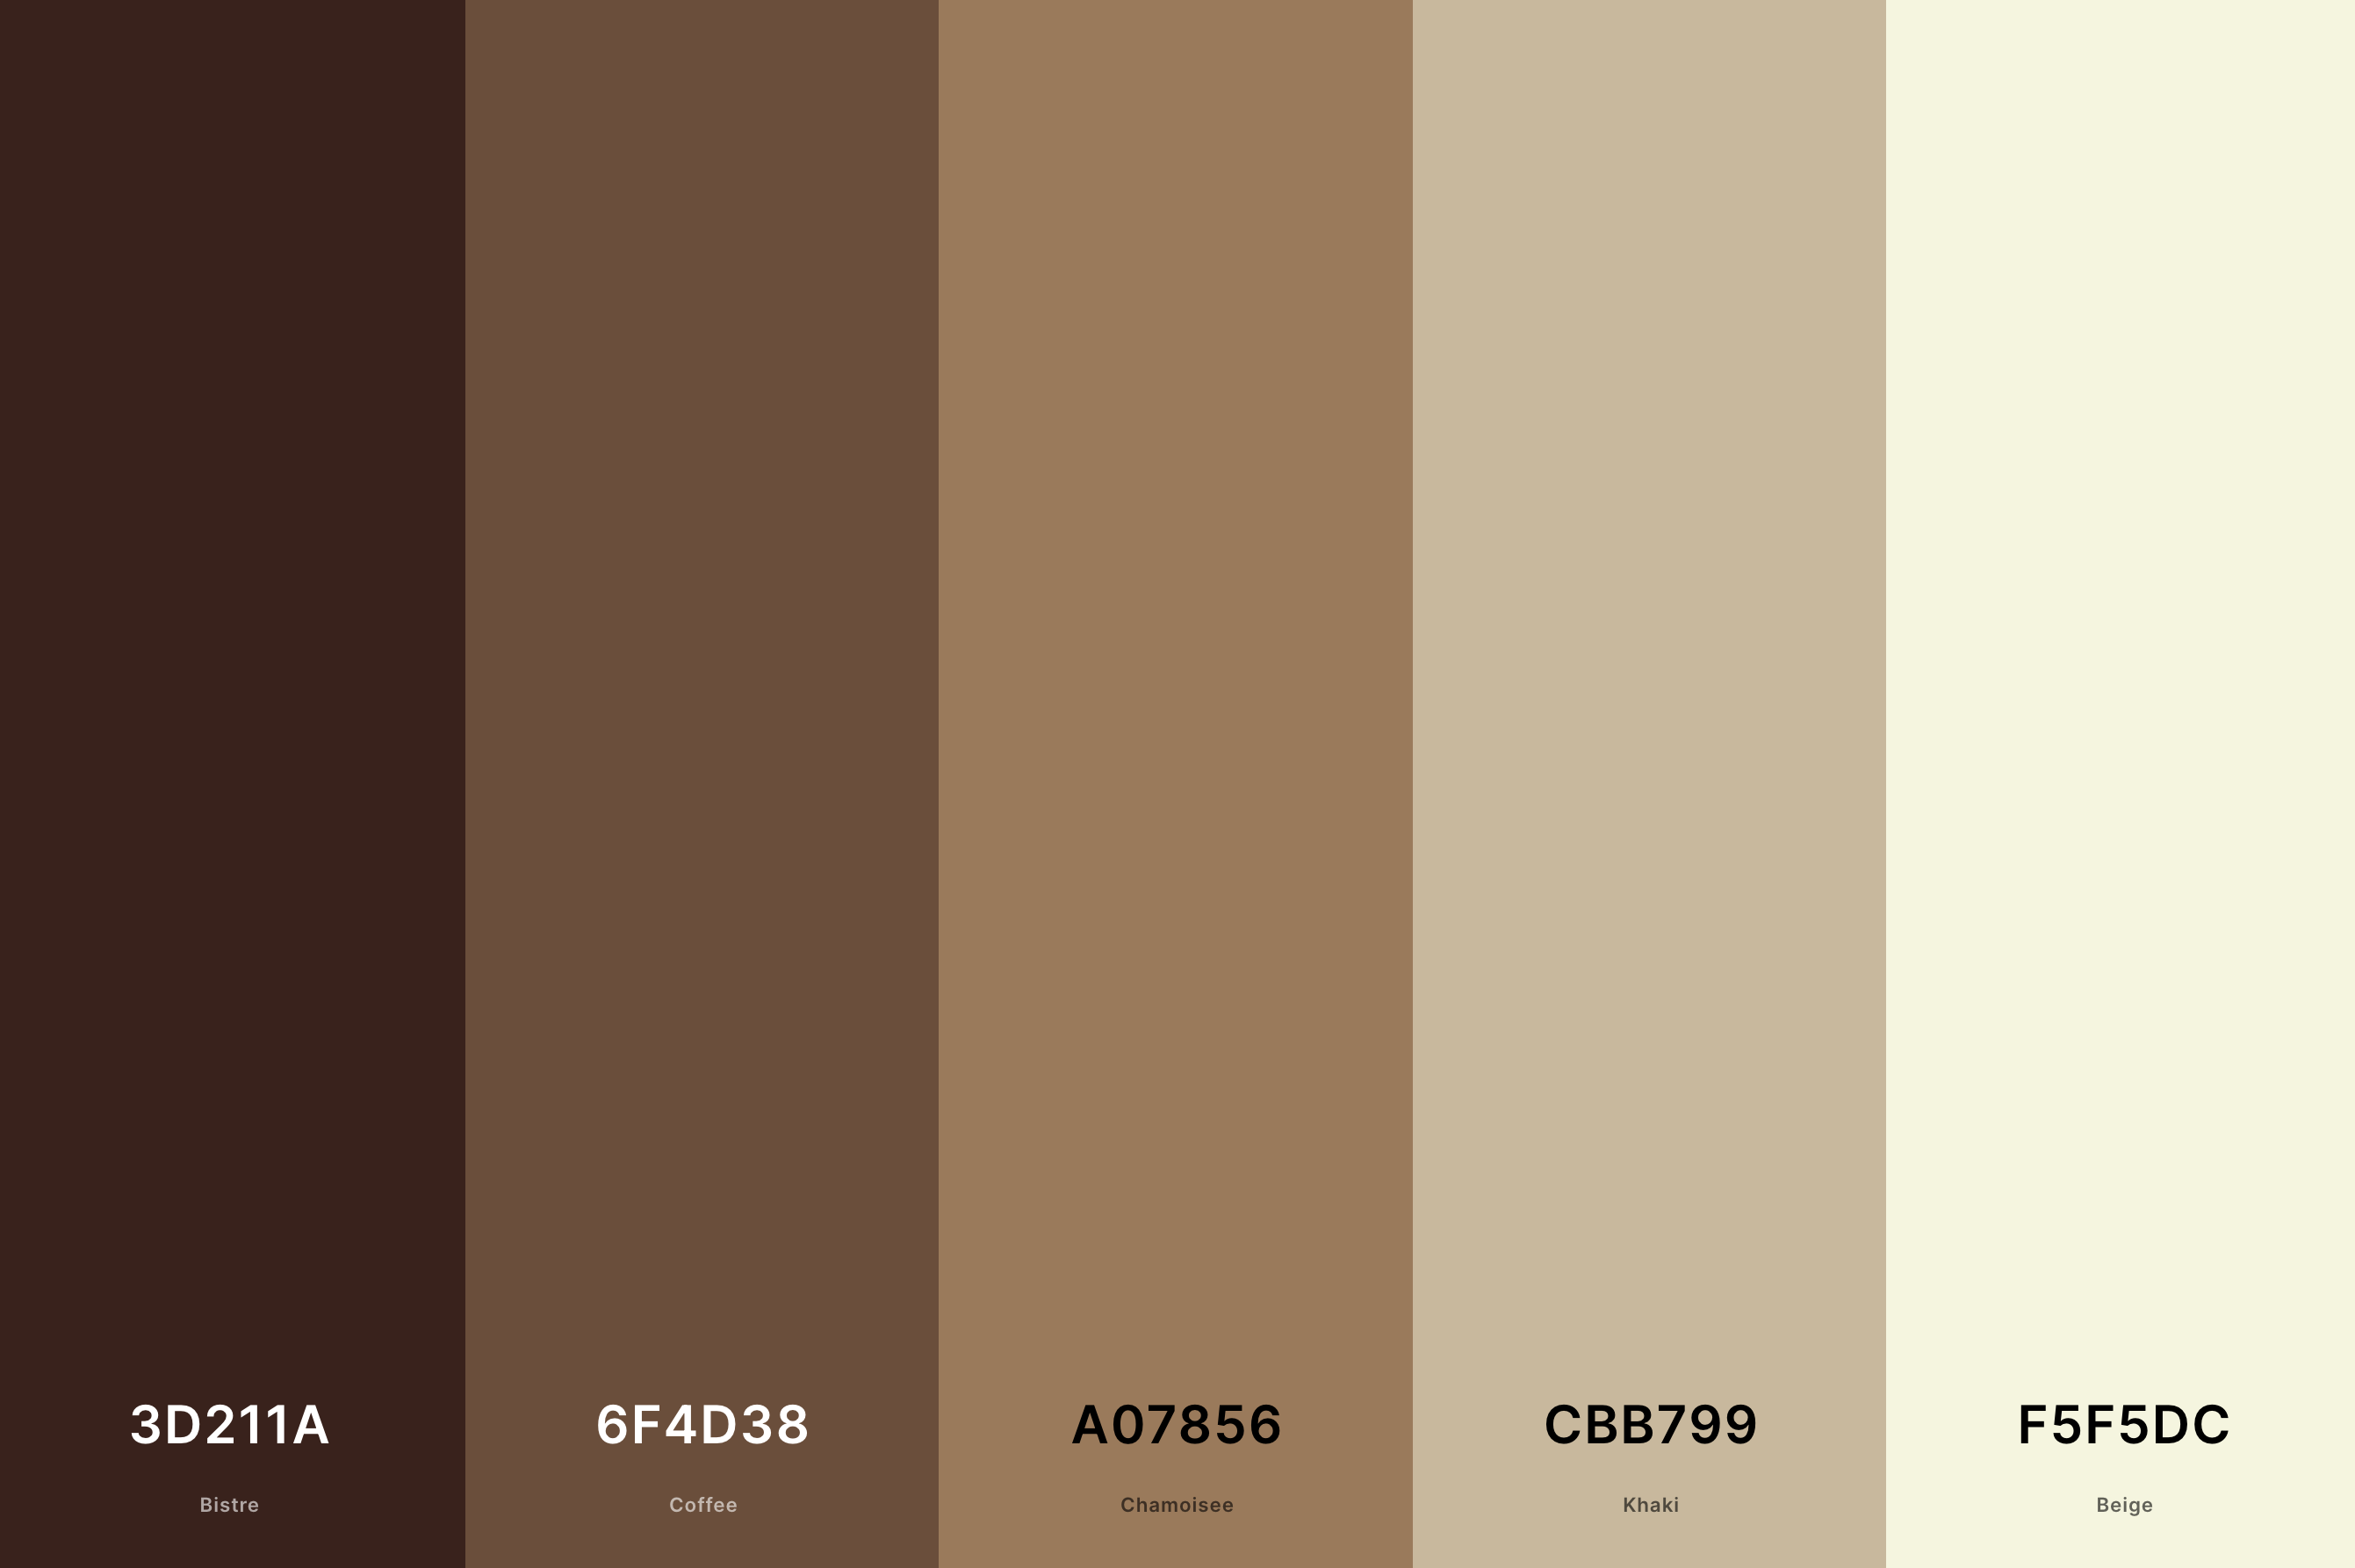 10. Brown And Beige Color Palette Color Palette with Bistre (Hex #3D211A) + Coffee (Hex #6F4D38) + Chamoisee (Hex #A07856) + Khaki (Hex #CBB799) + Beige (Hex #F5F5DC) Color Palette with Hex Codes